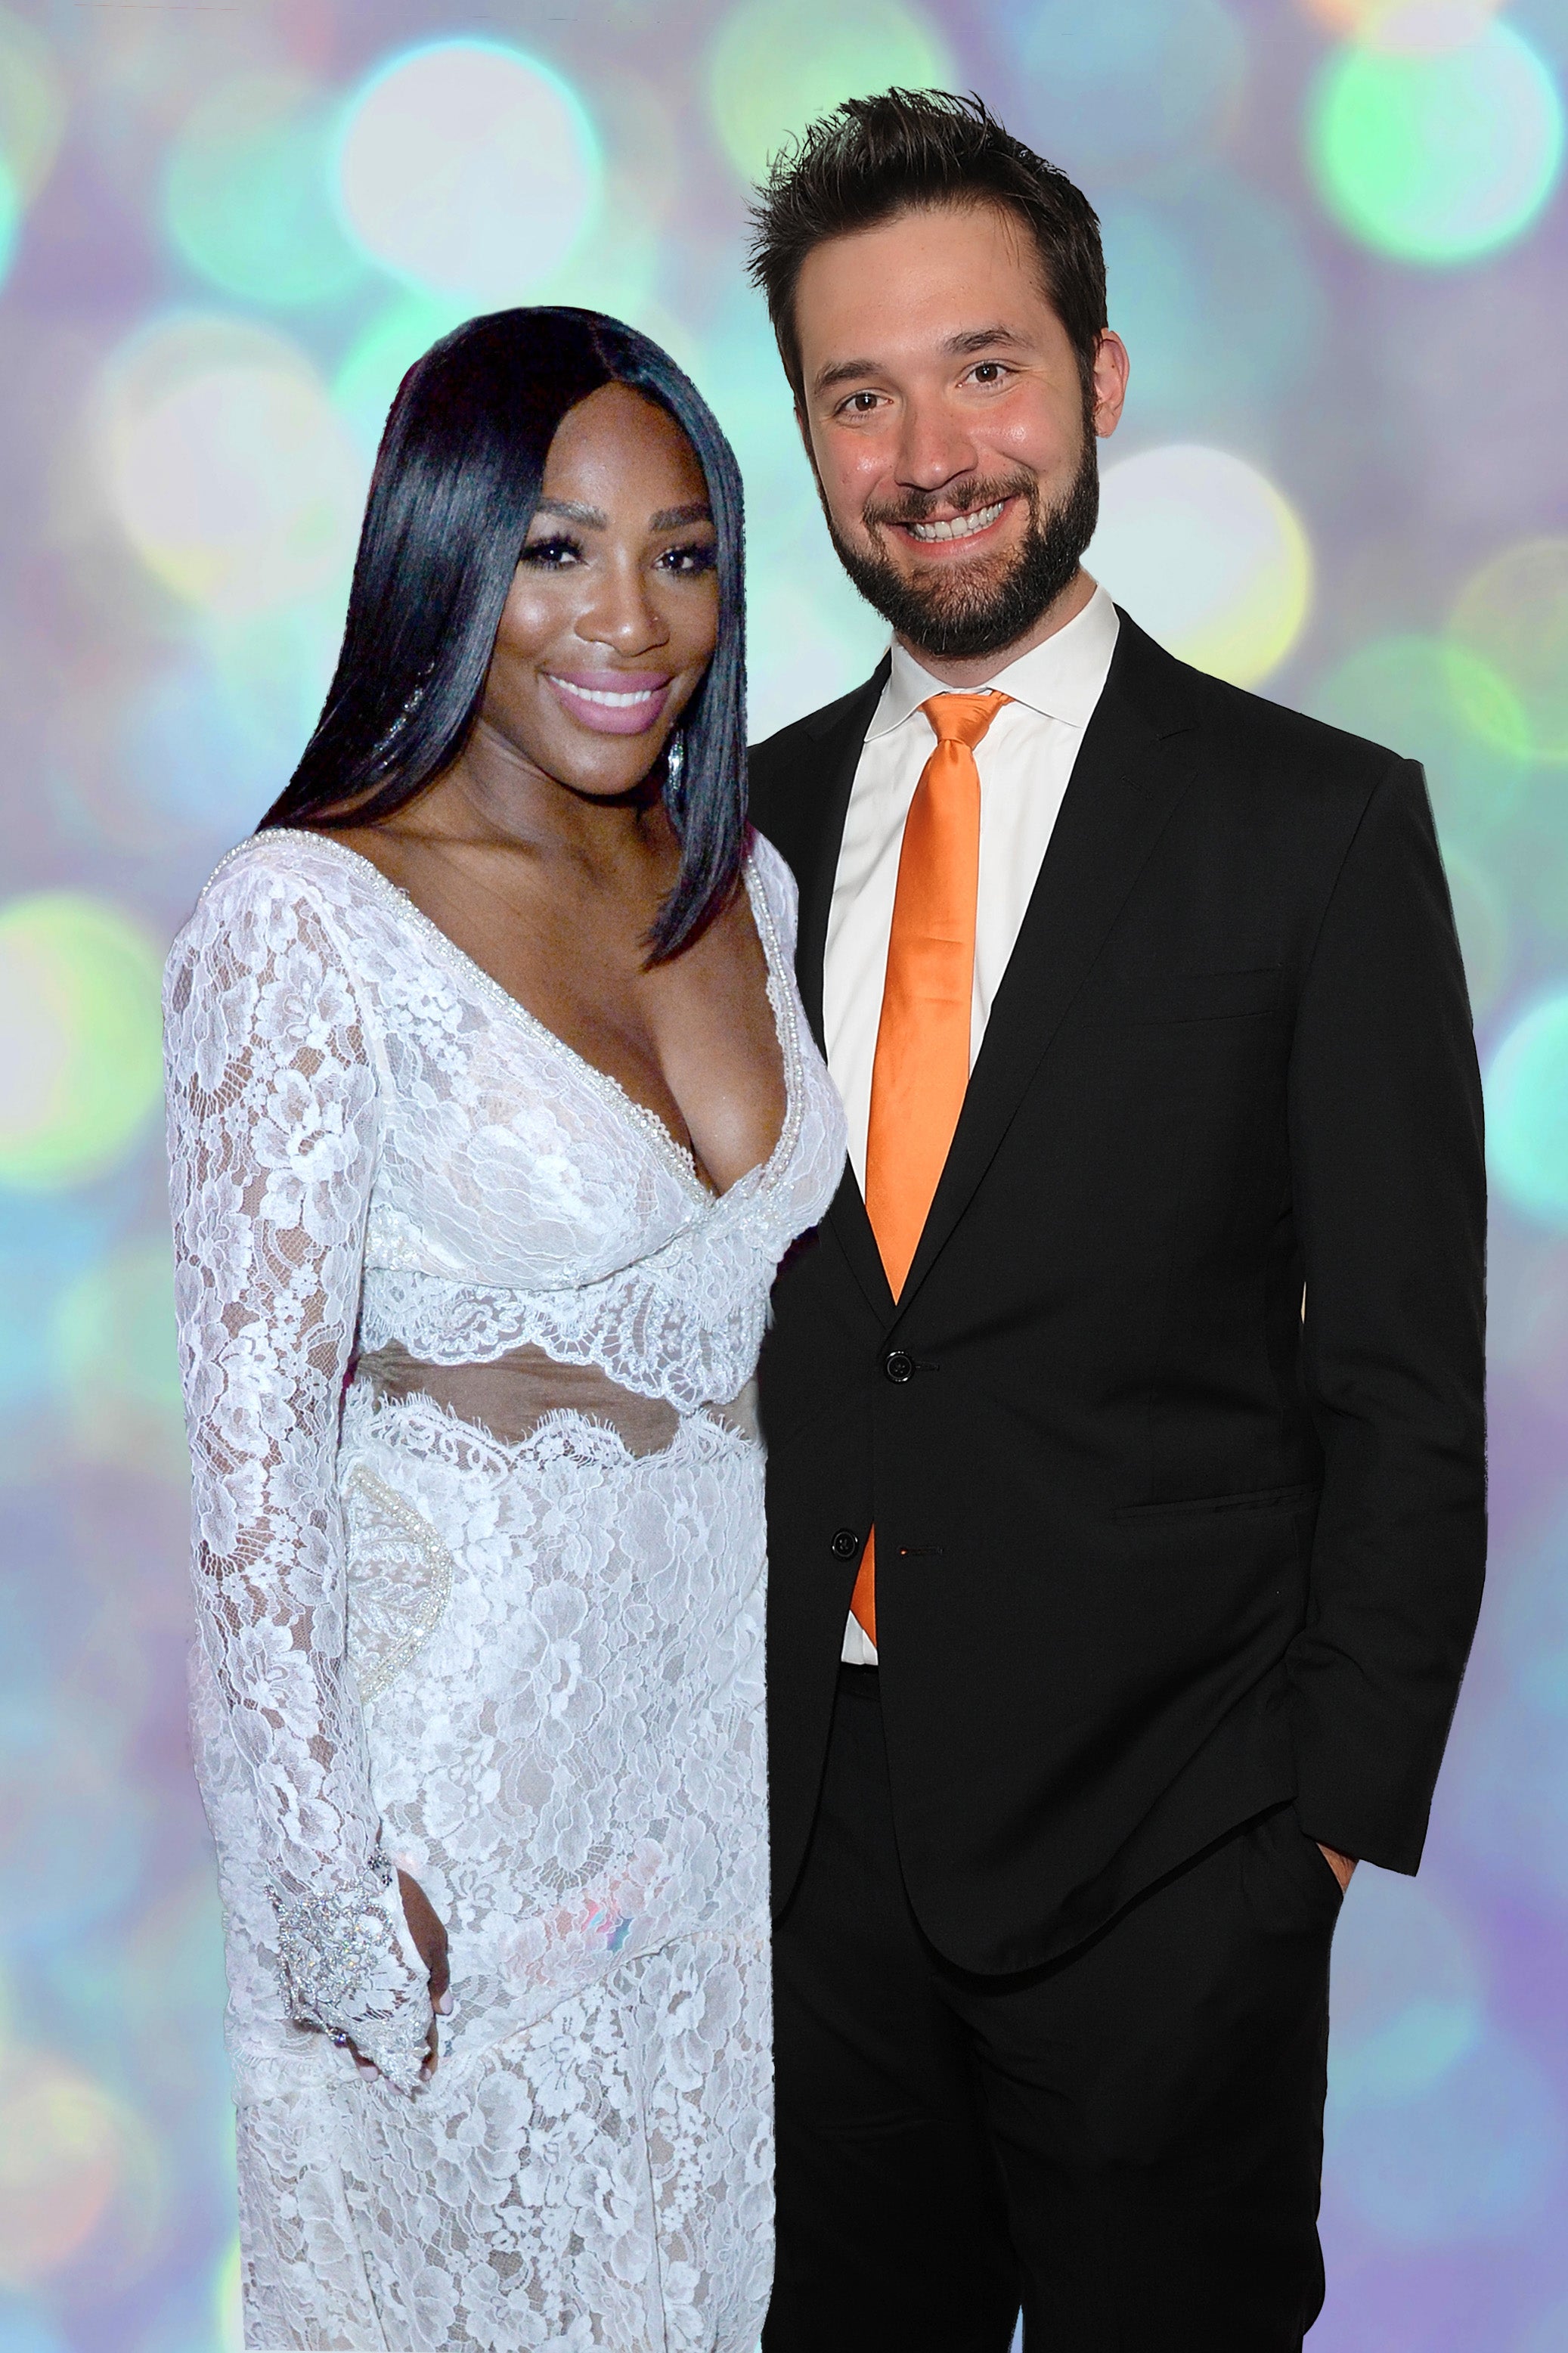 Serena Williams Is Going To Be A Mom!
